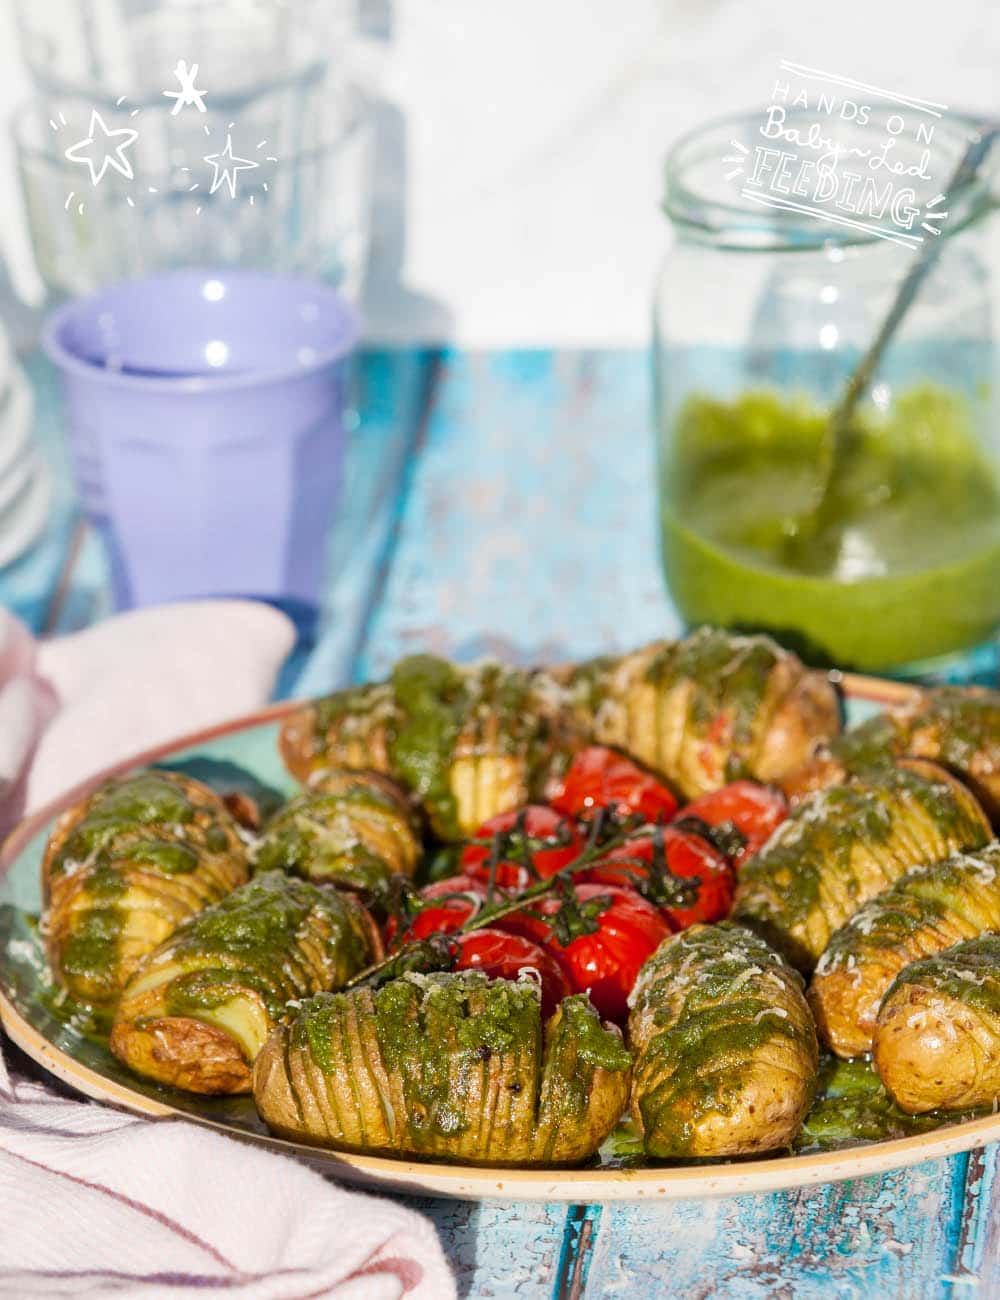 Hasselback Baby Potatoes with Basil and Spinach Pumpkin Seed Pesto easy, quick and amazingly nutritious Zoomed in front image. A sure winner for fussy kids. One family one dinner recipe. Homemade Baby Food Recipes for baby led weaning by Aileen Cox Blundell author of The Baby Led Feeding Cookbook.